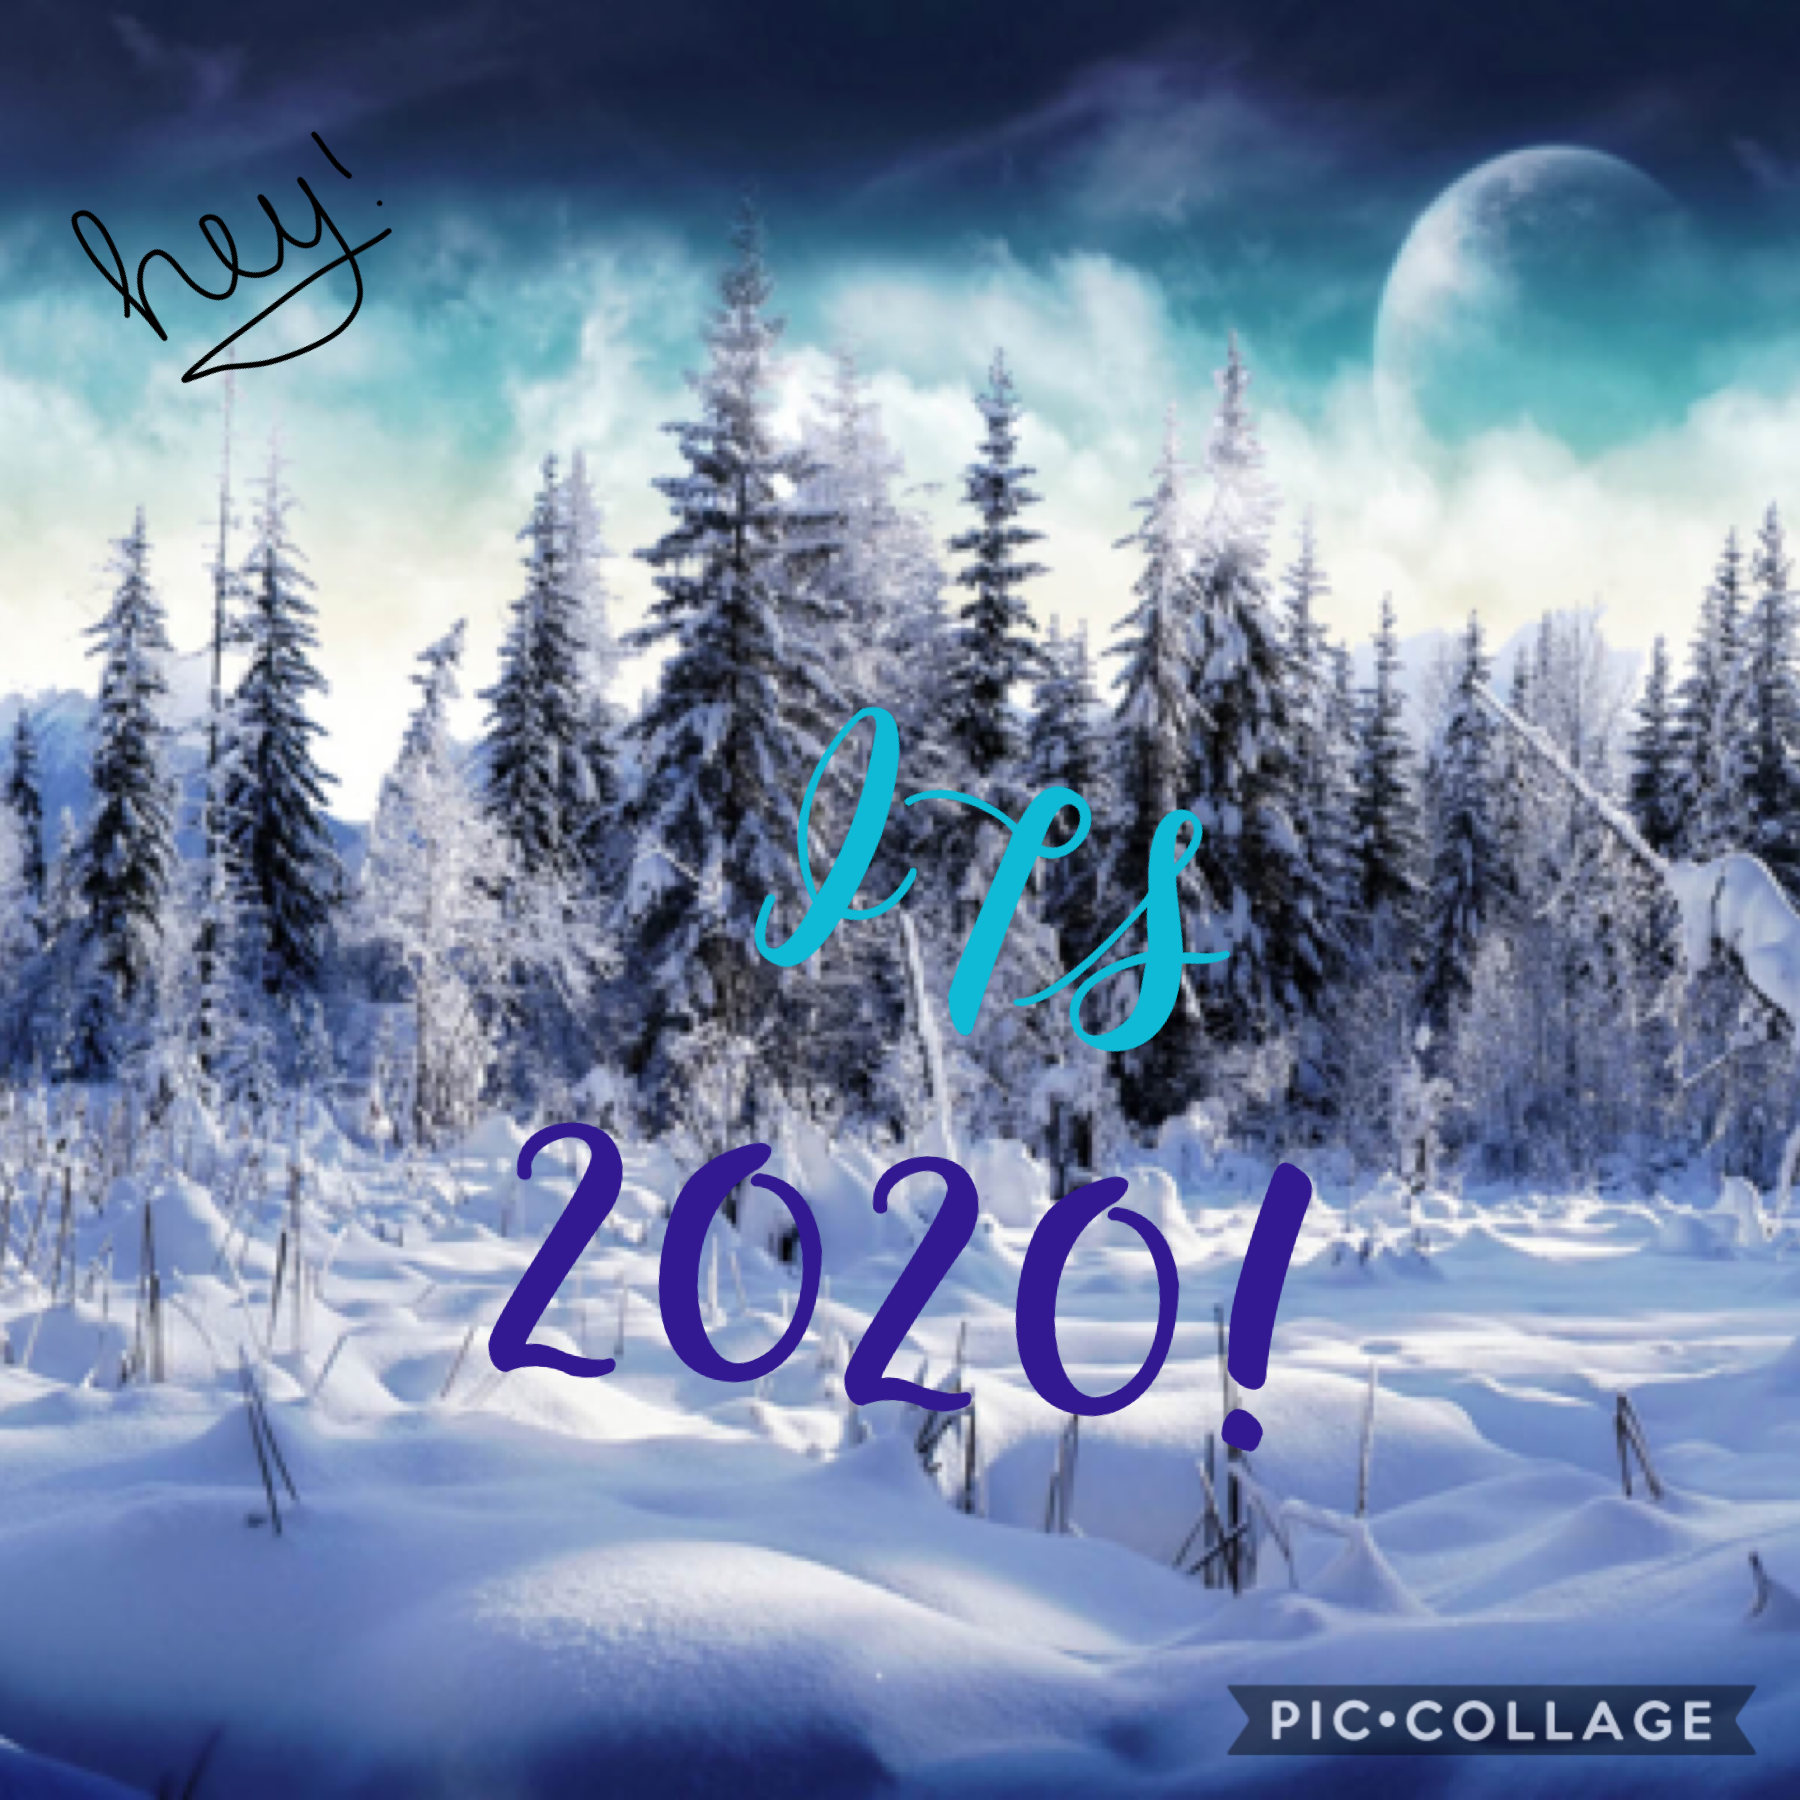 hey y’all i’m back sorry for being gone so long! HAPPY 2020!